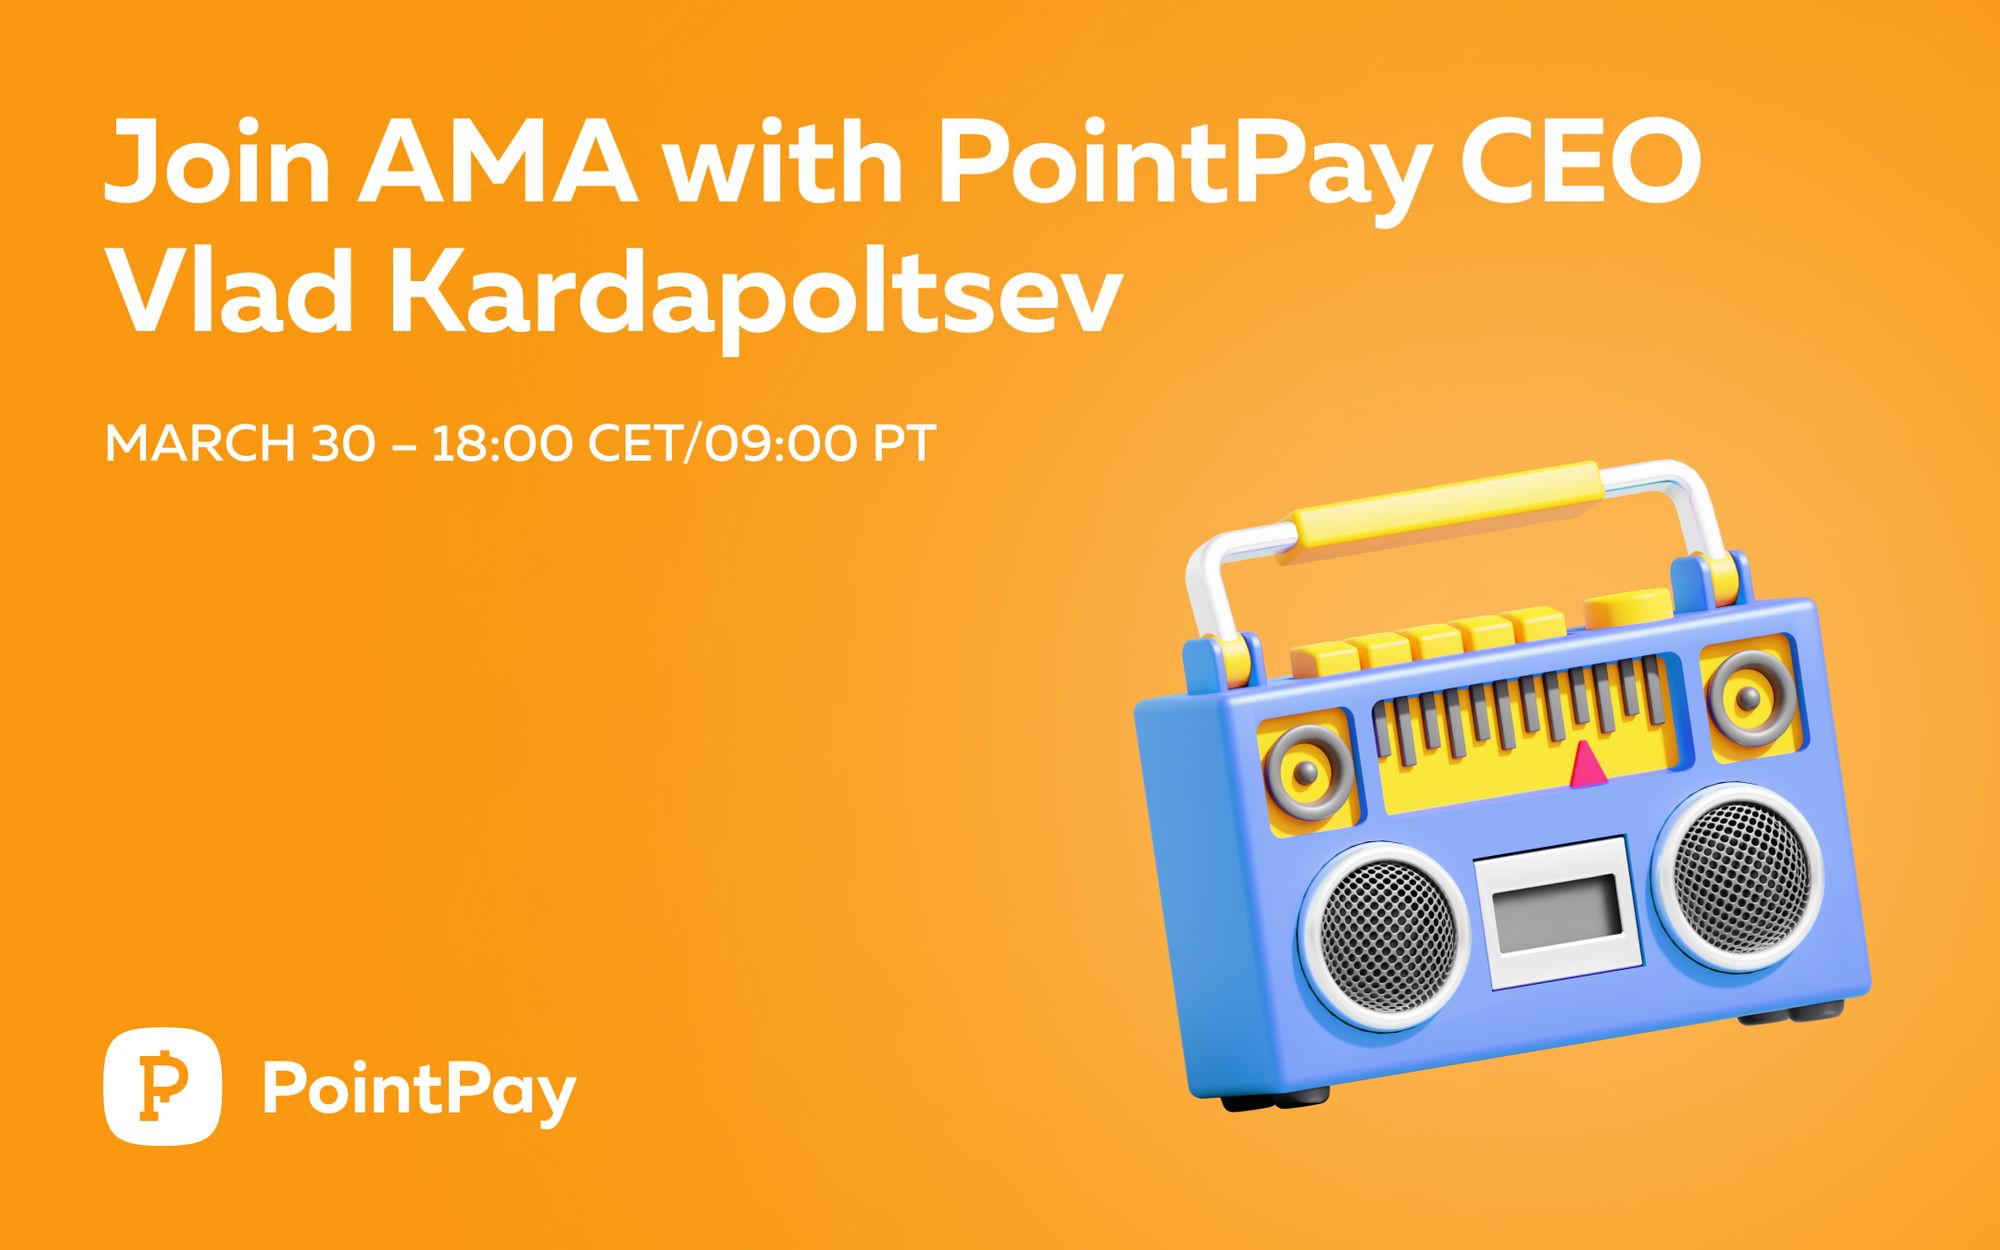 Join AMA with PointPay CEO Vladimir Kardapoltsev on March 30 (18:00 CET time)